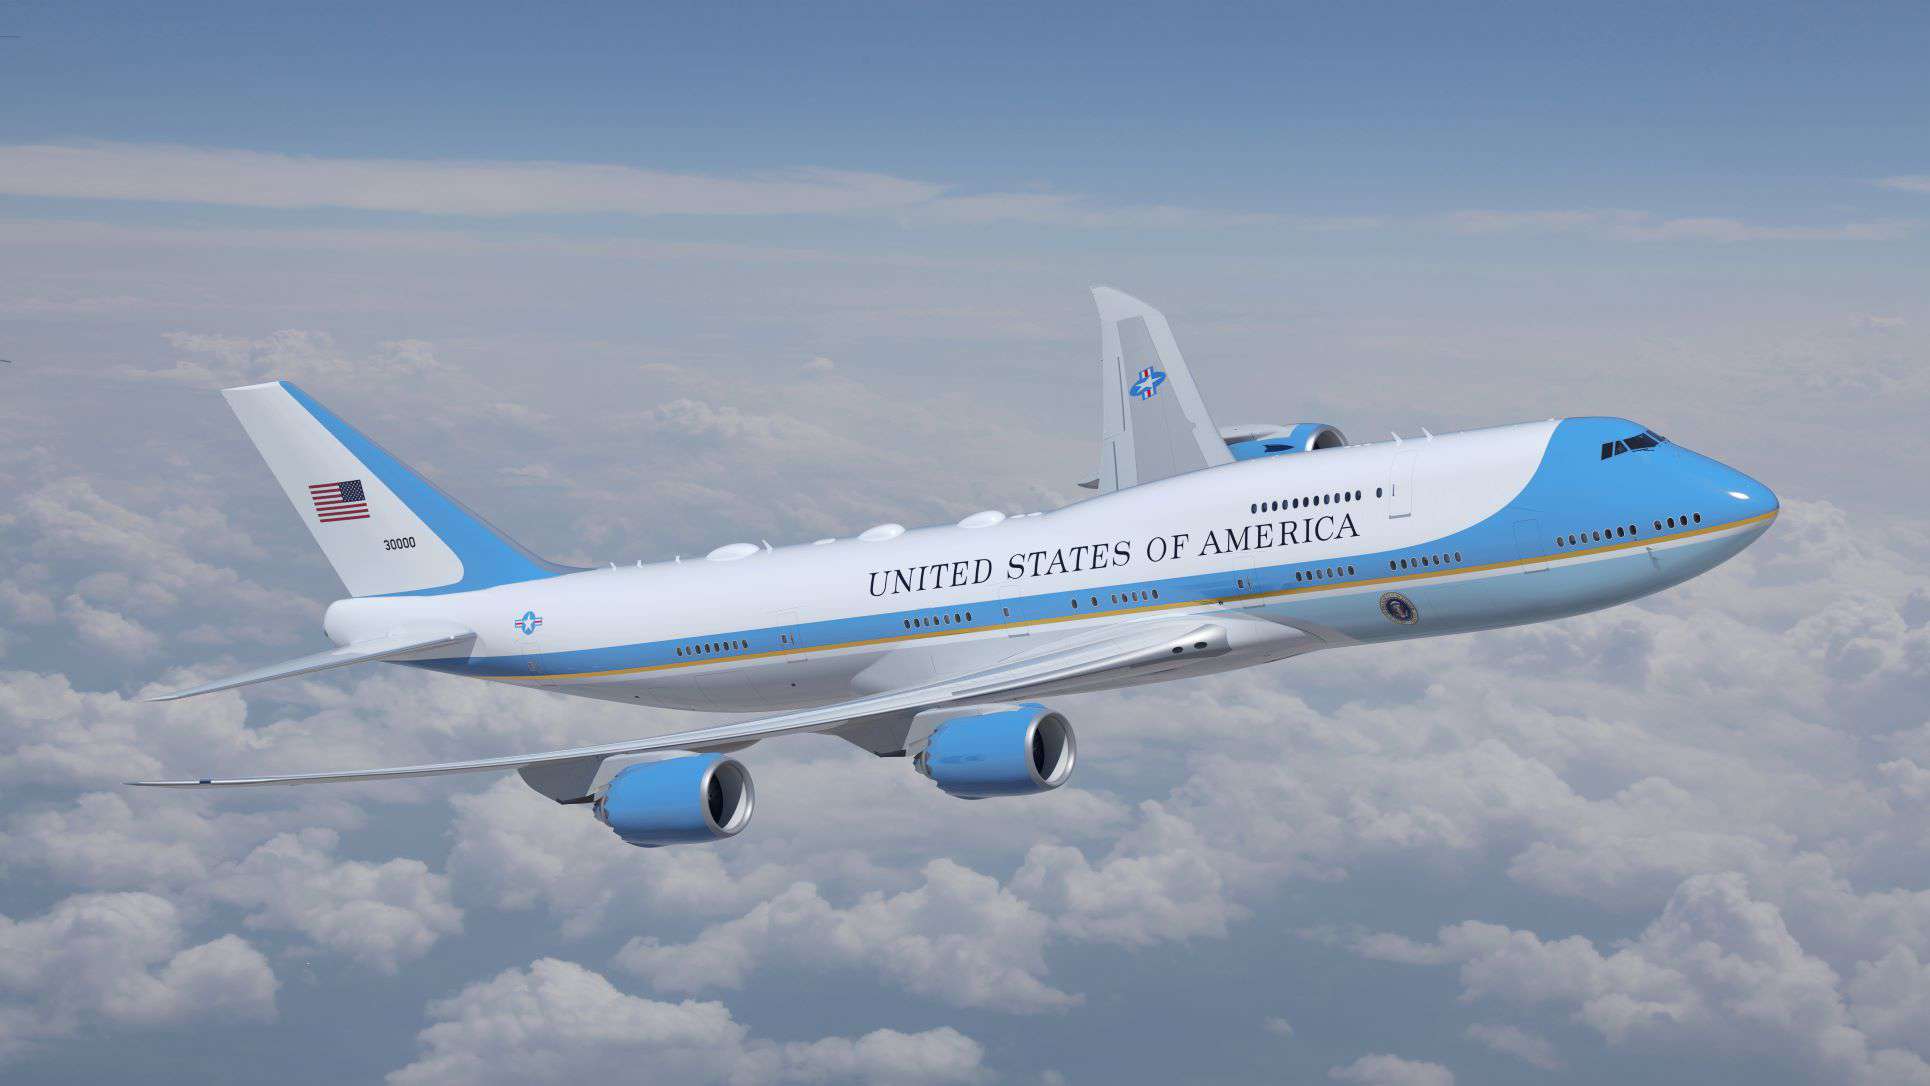 Paint scheme for the VC-25B Air Force One